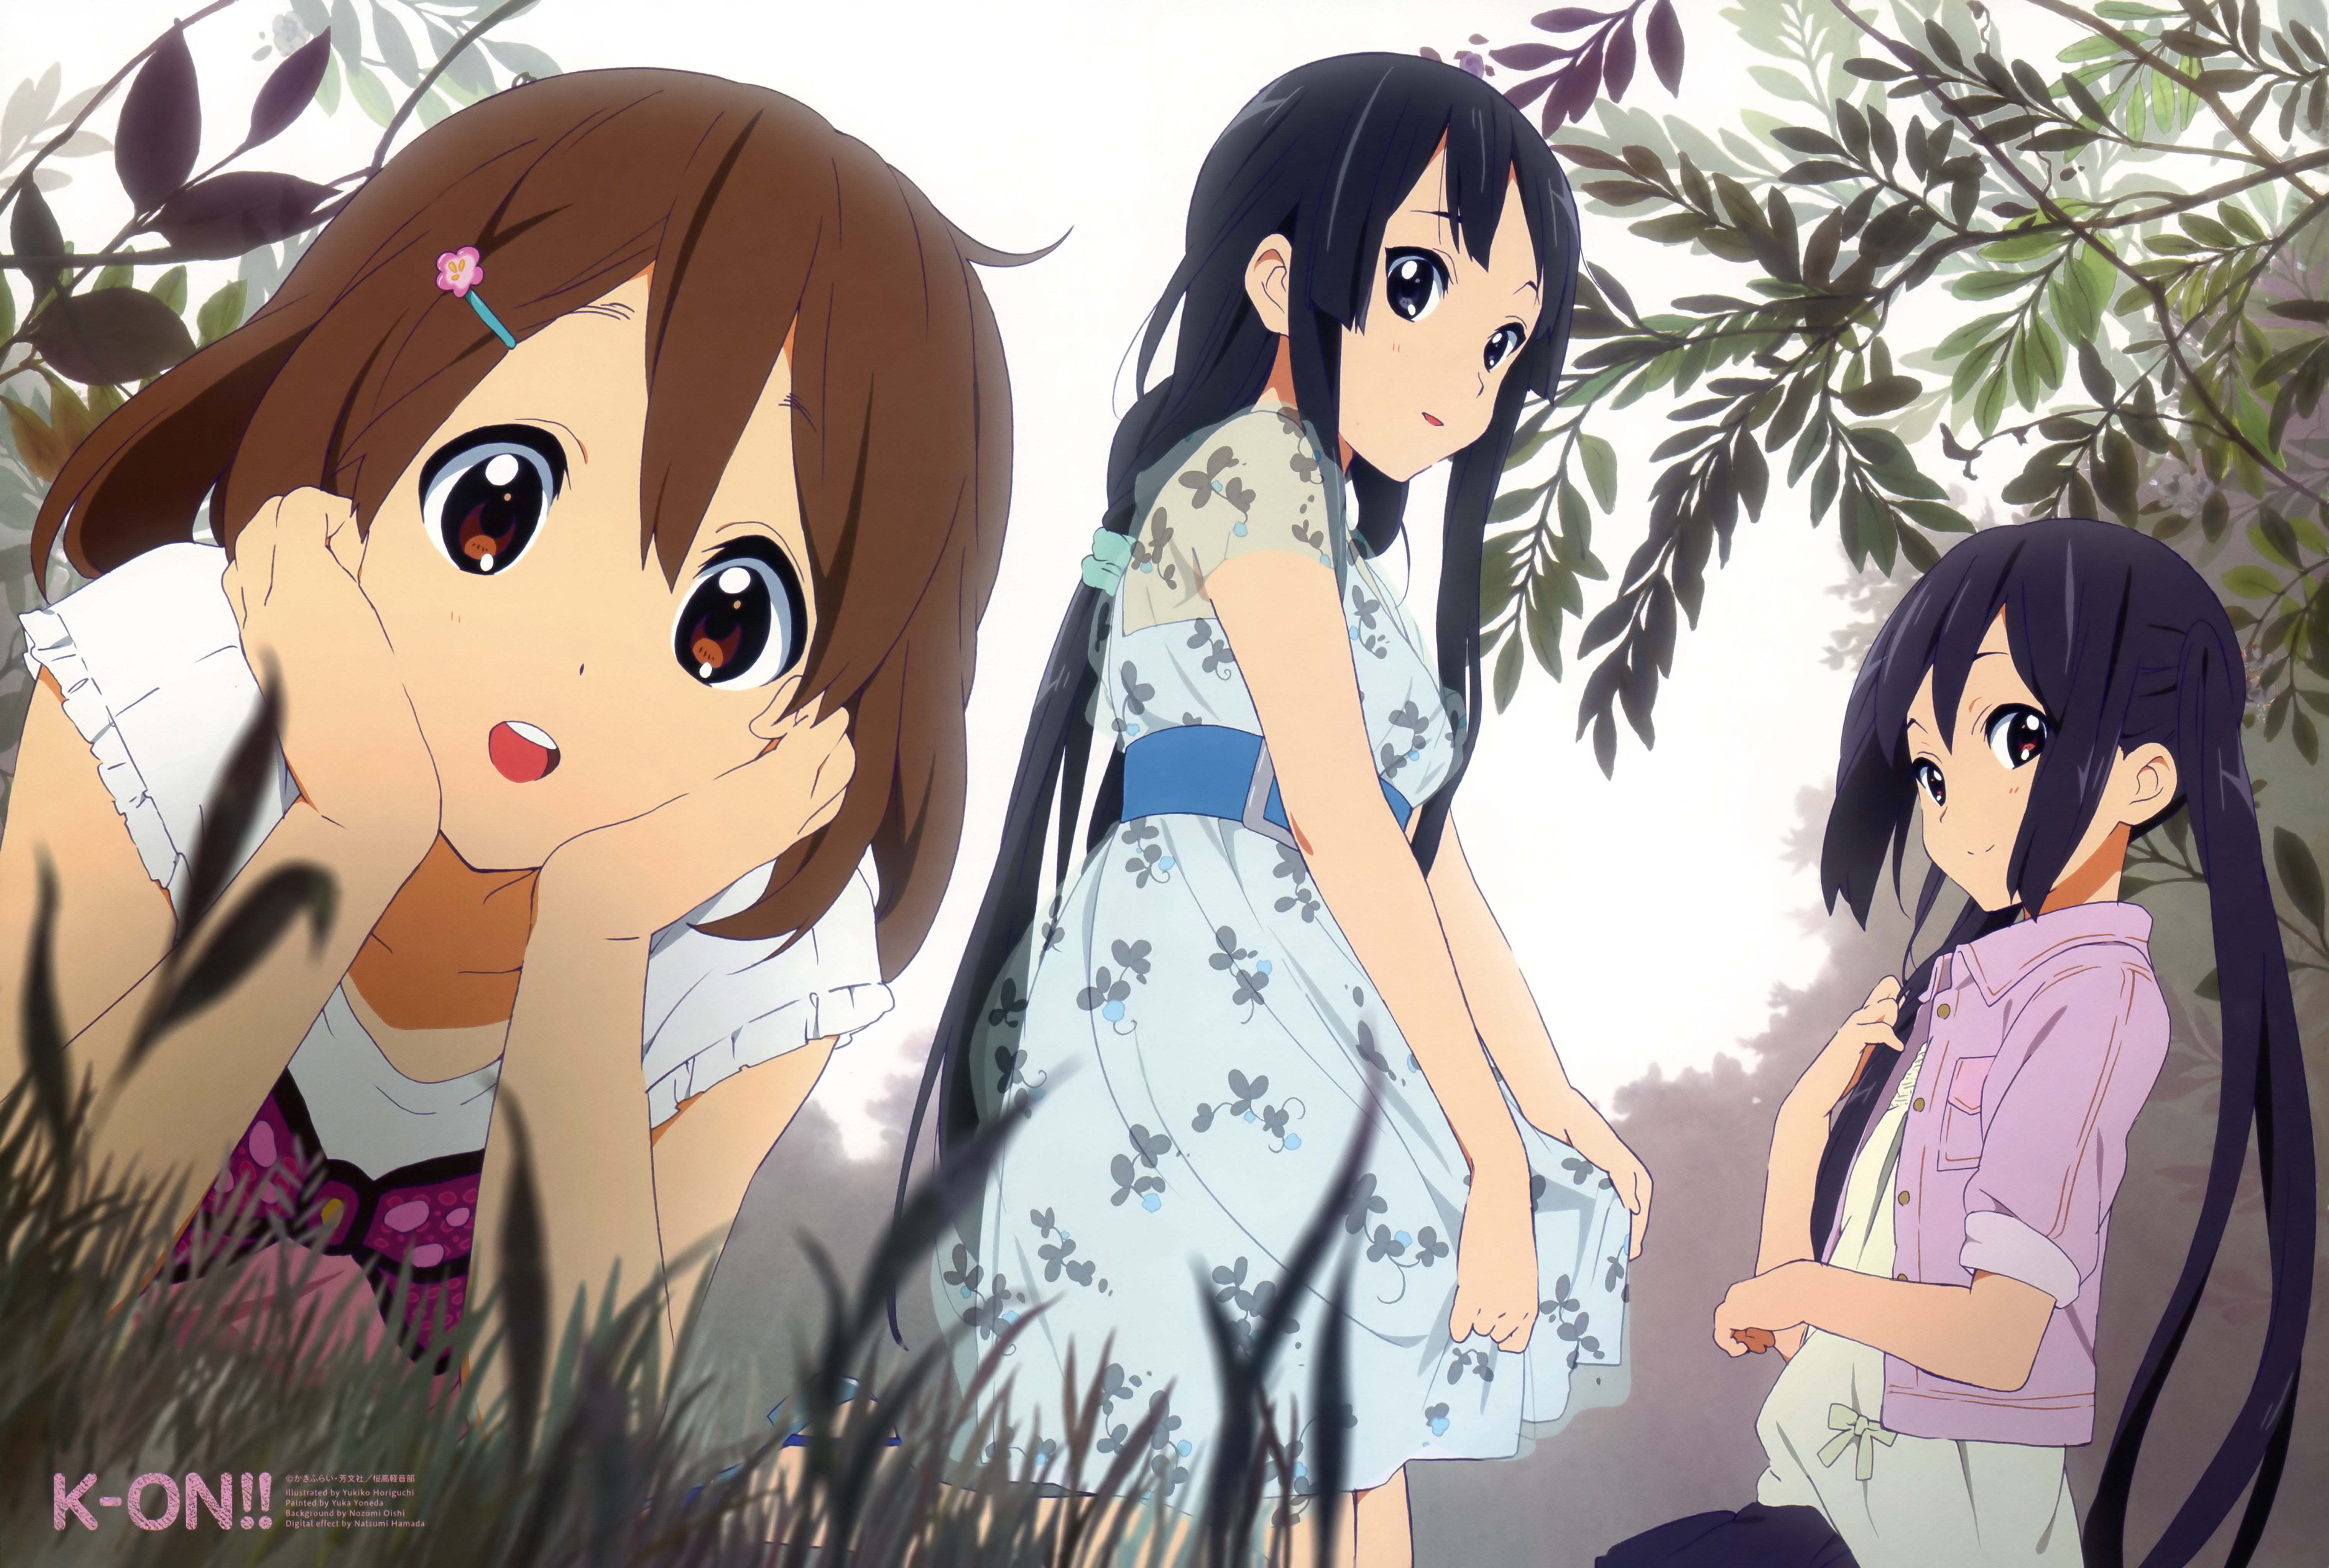 Anime characters Yui, Mio, and Azusa from K-On! in 4k Ultra HD desktop wallpaper.